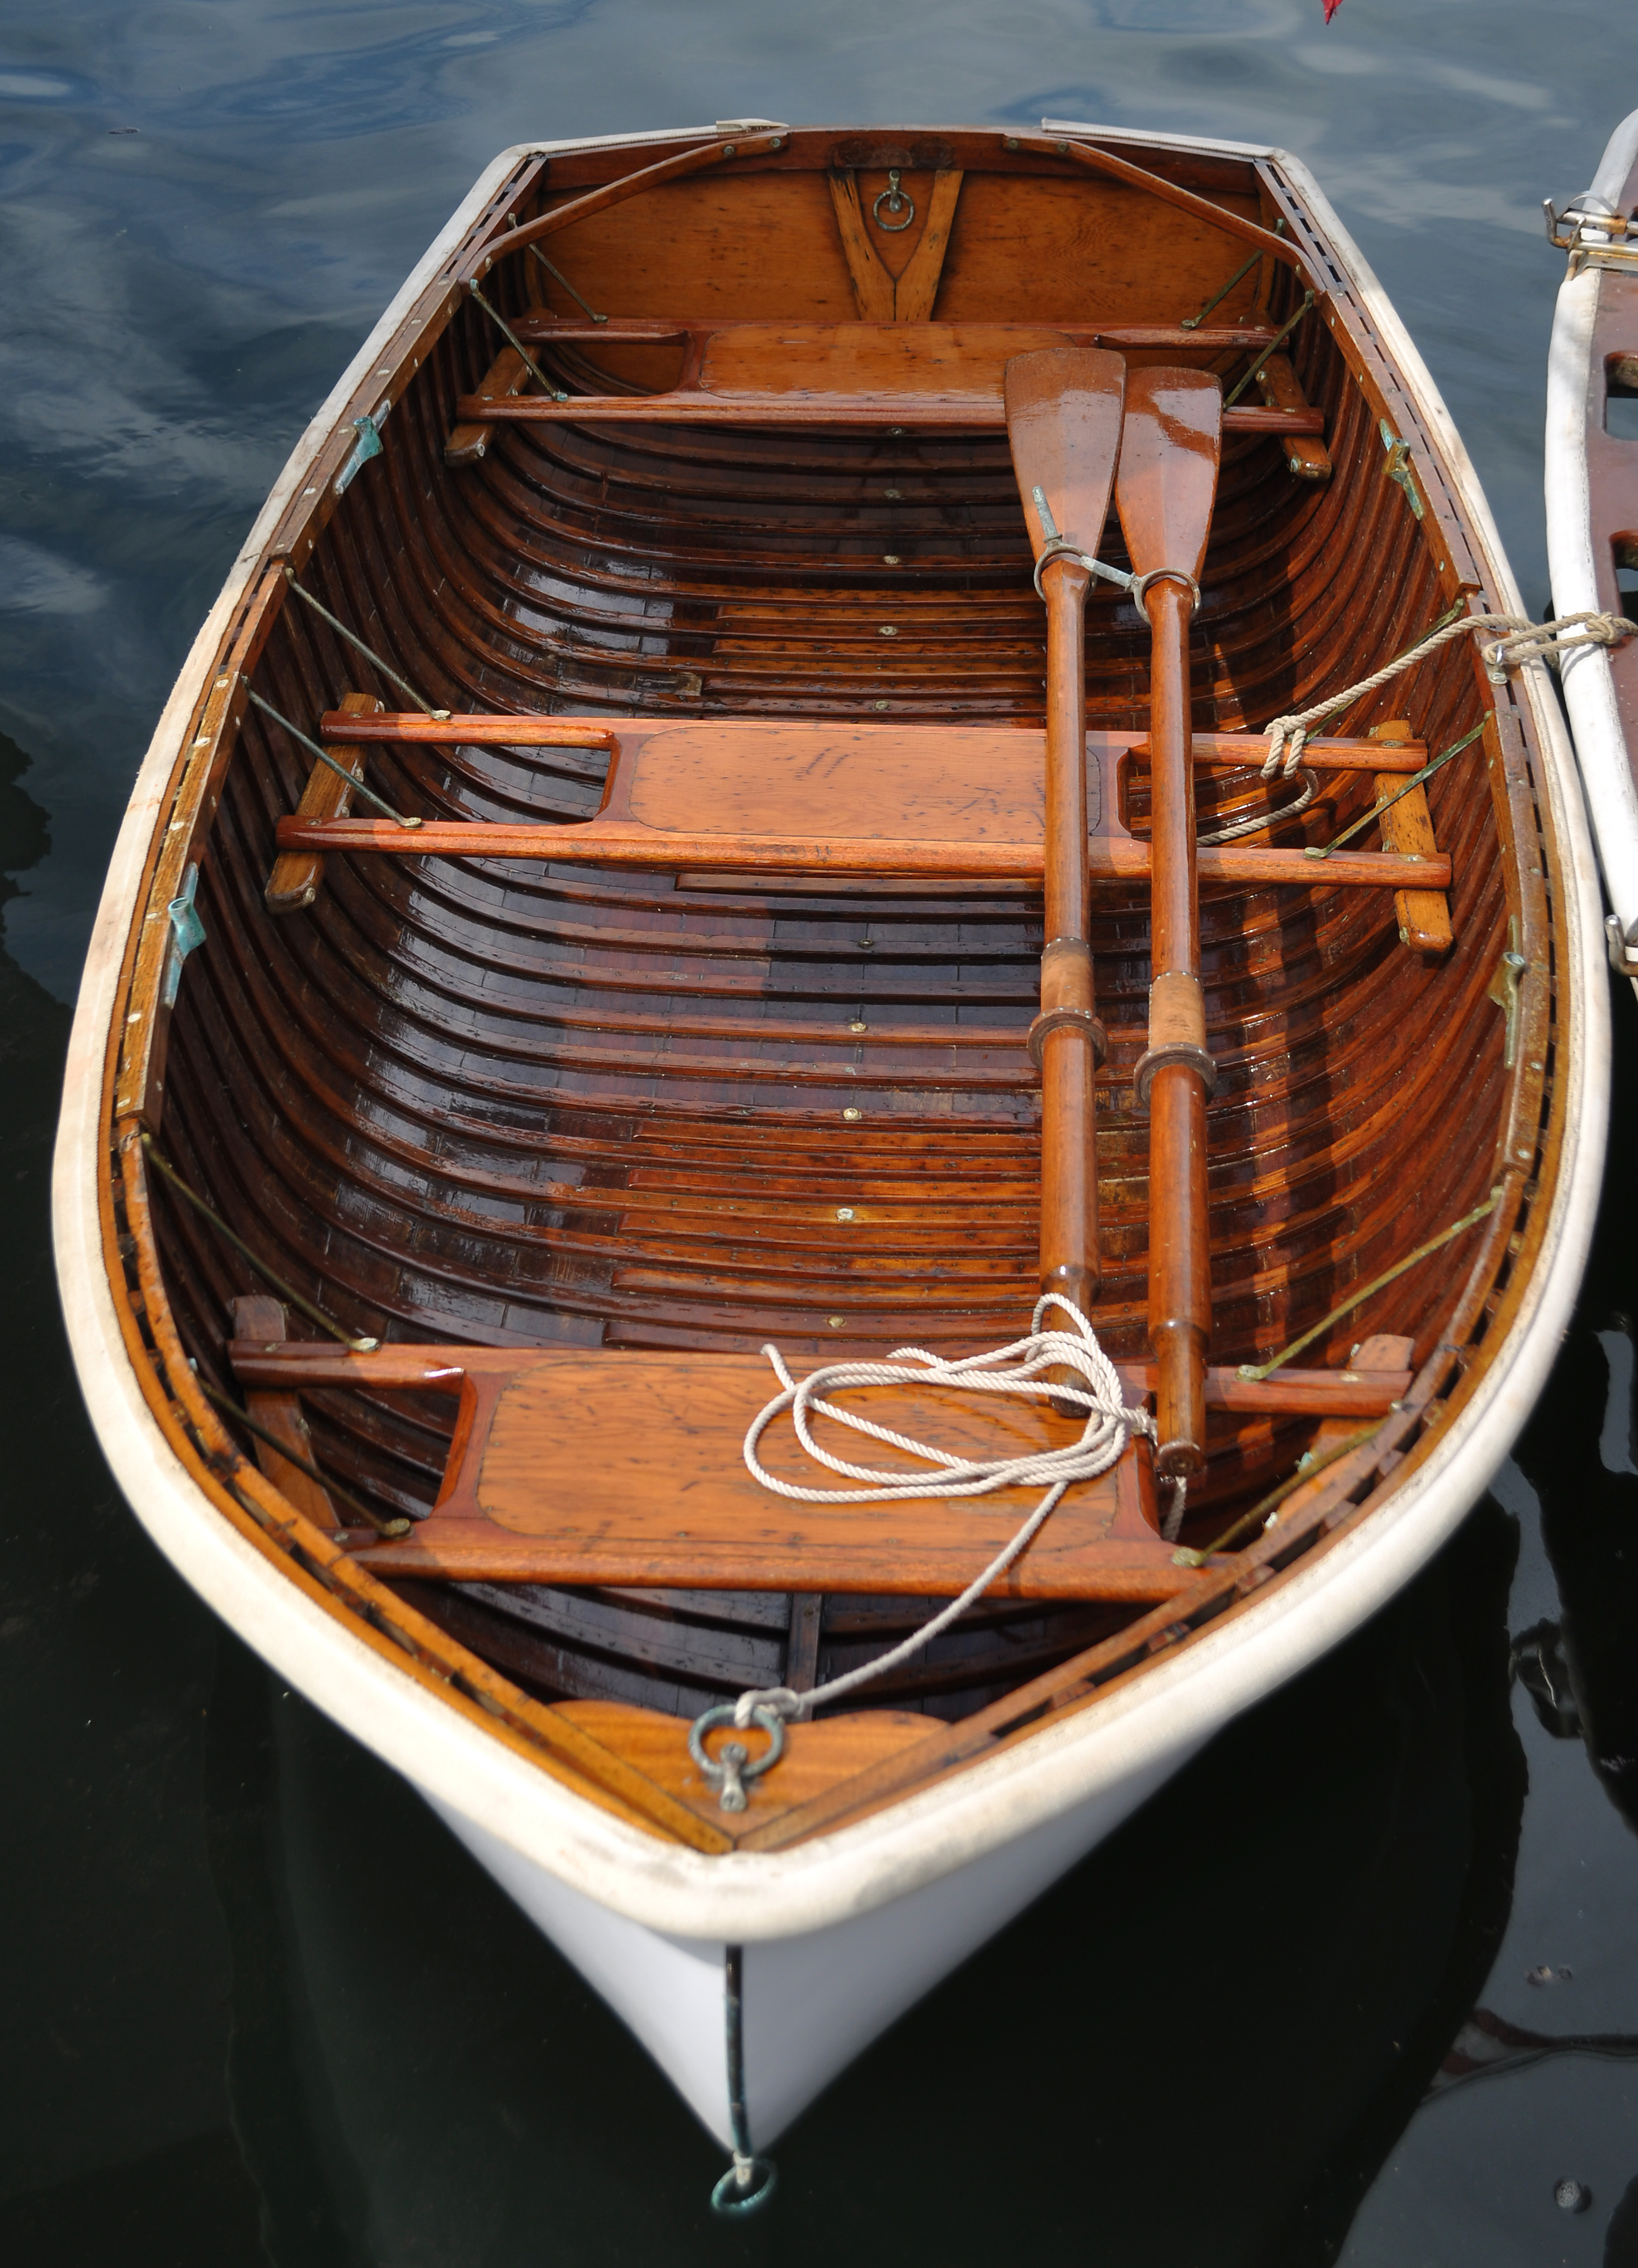 may 12, 2013 – wooden boats on the water don & callie's